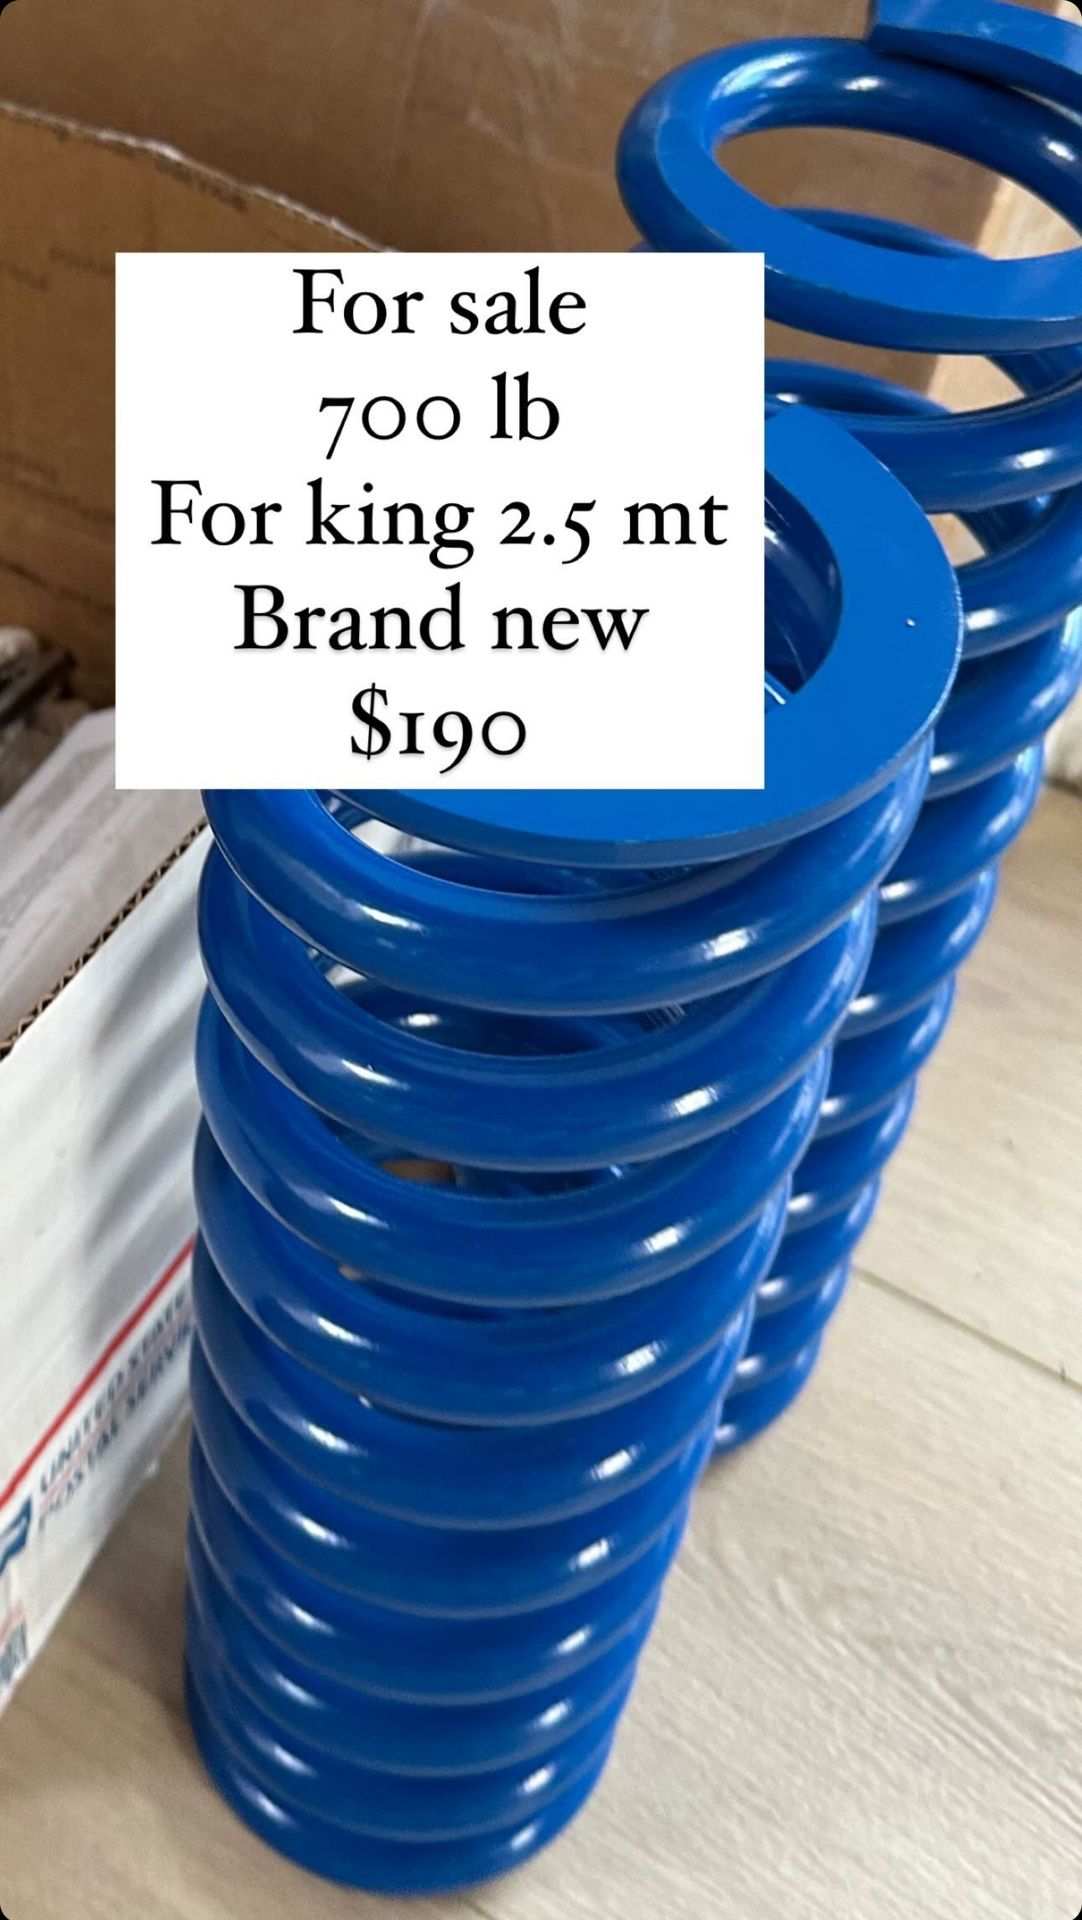 KING 700 LB springs For 2.5 Inch Mid Travel Tacoma Shocks 